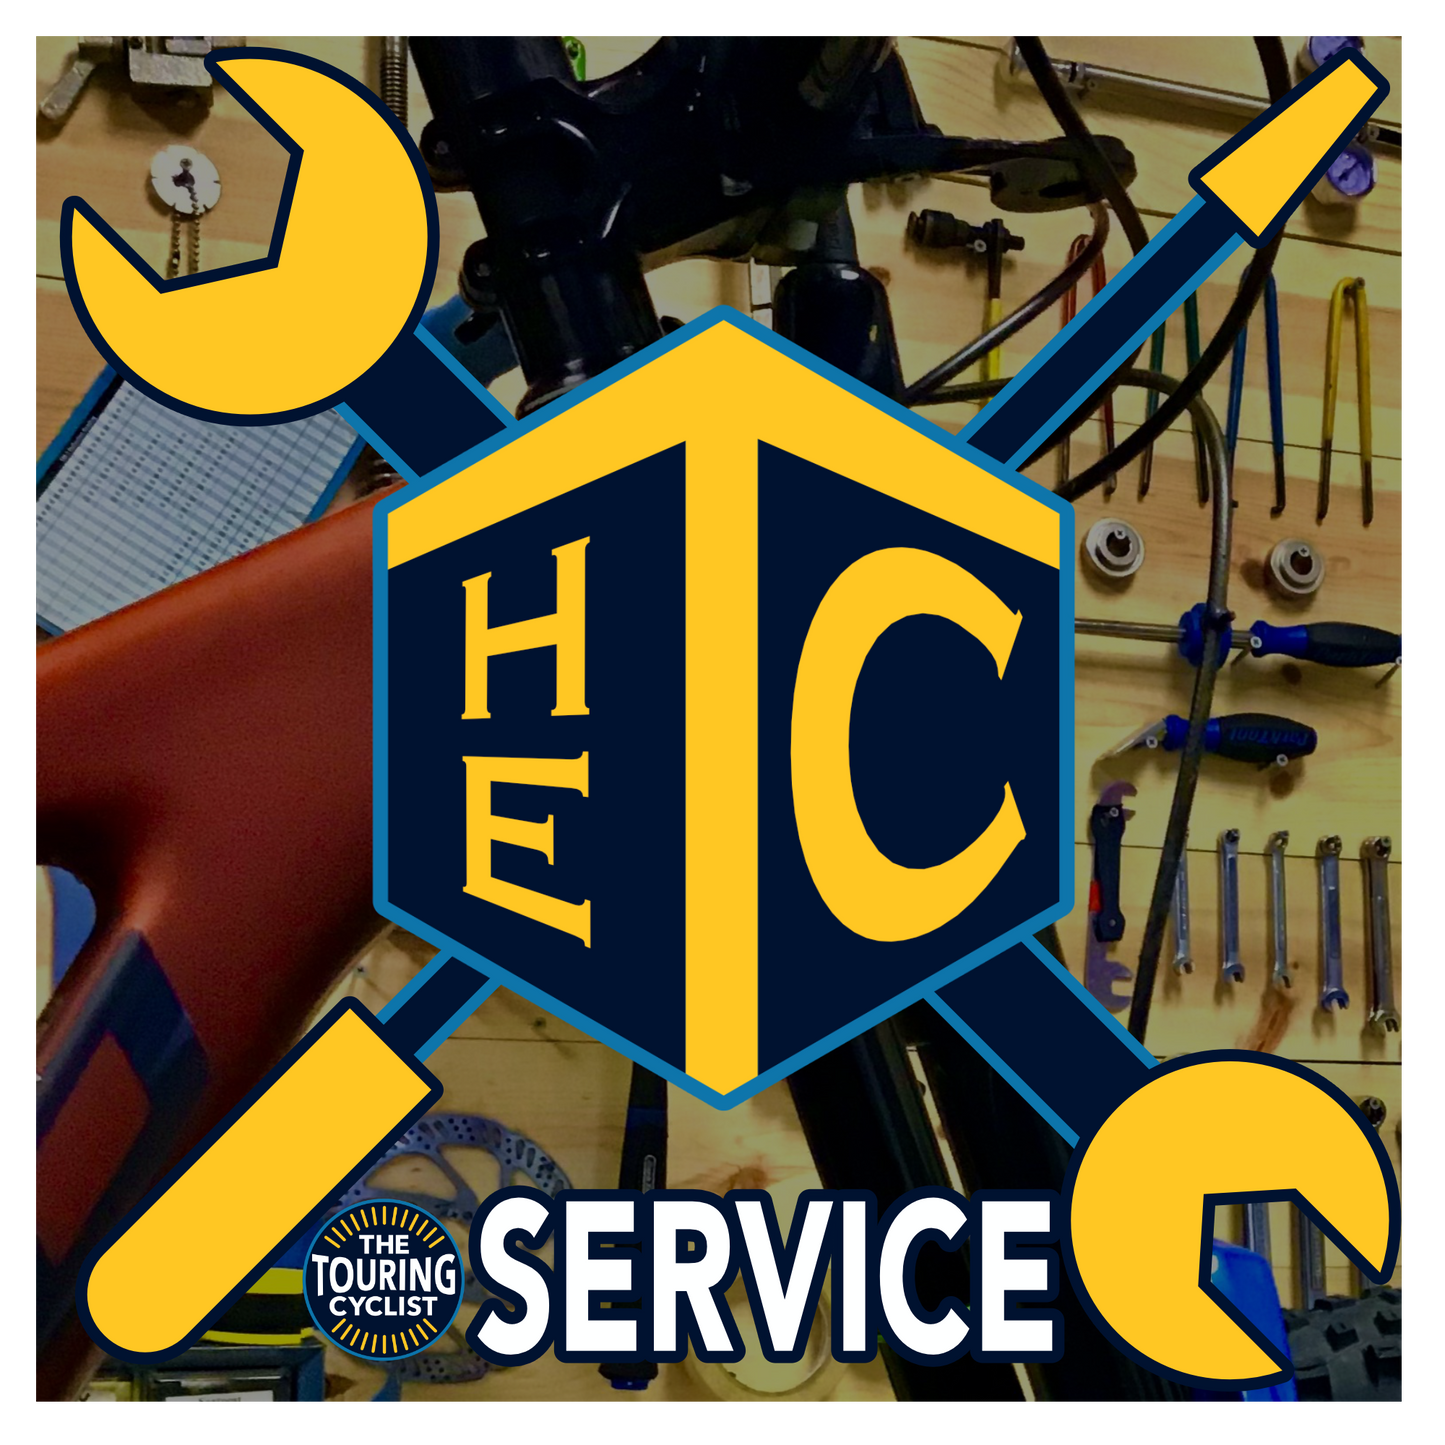 Service - New Boxed Tricycle or E-bike build (Not Purchased From The Touring Cyclist)